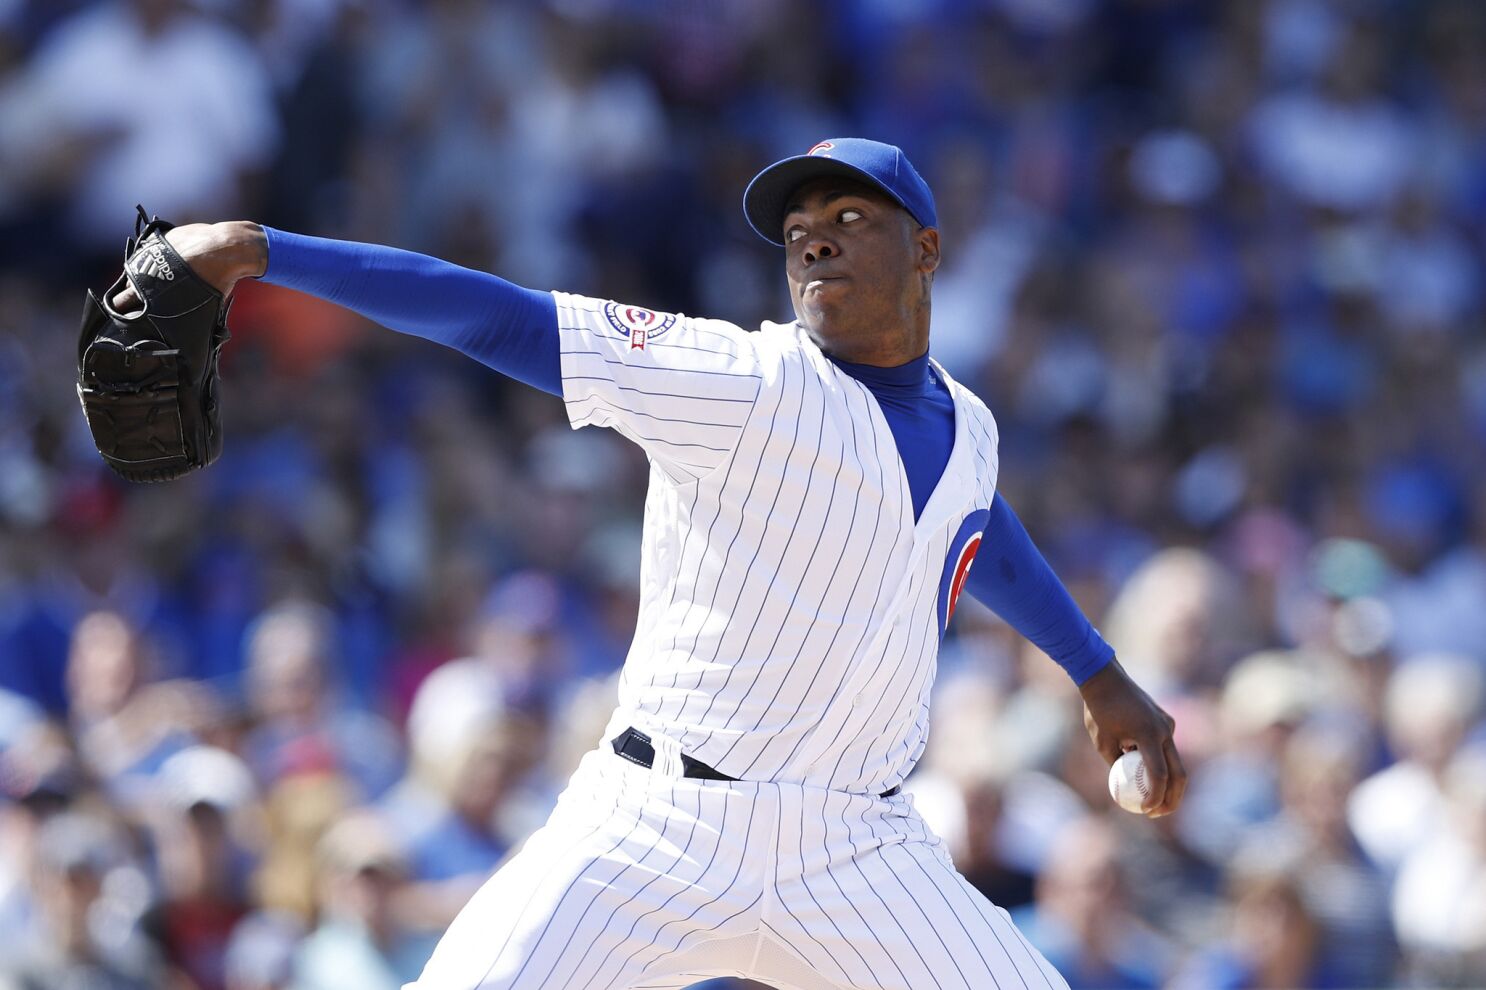 The Cubs need relief help. Should they trade for Aroldis Chapman